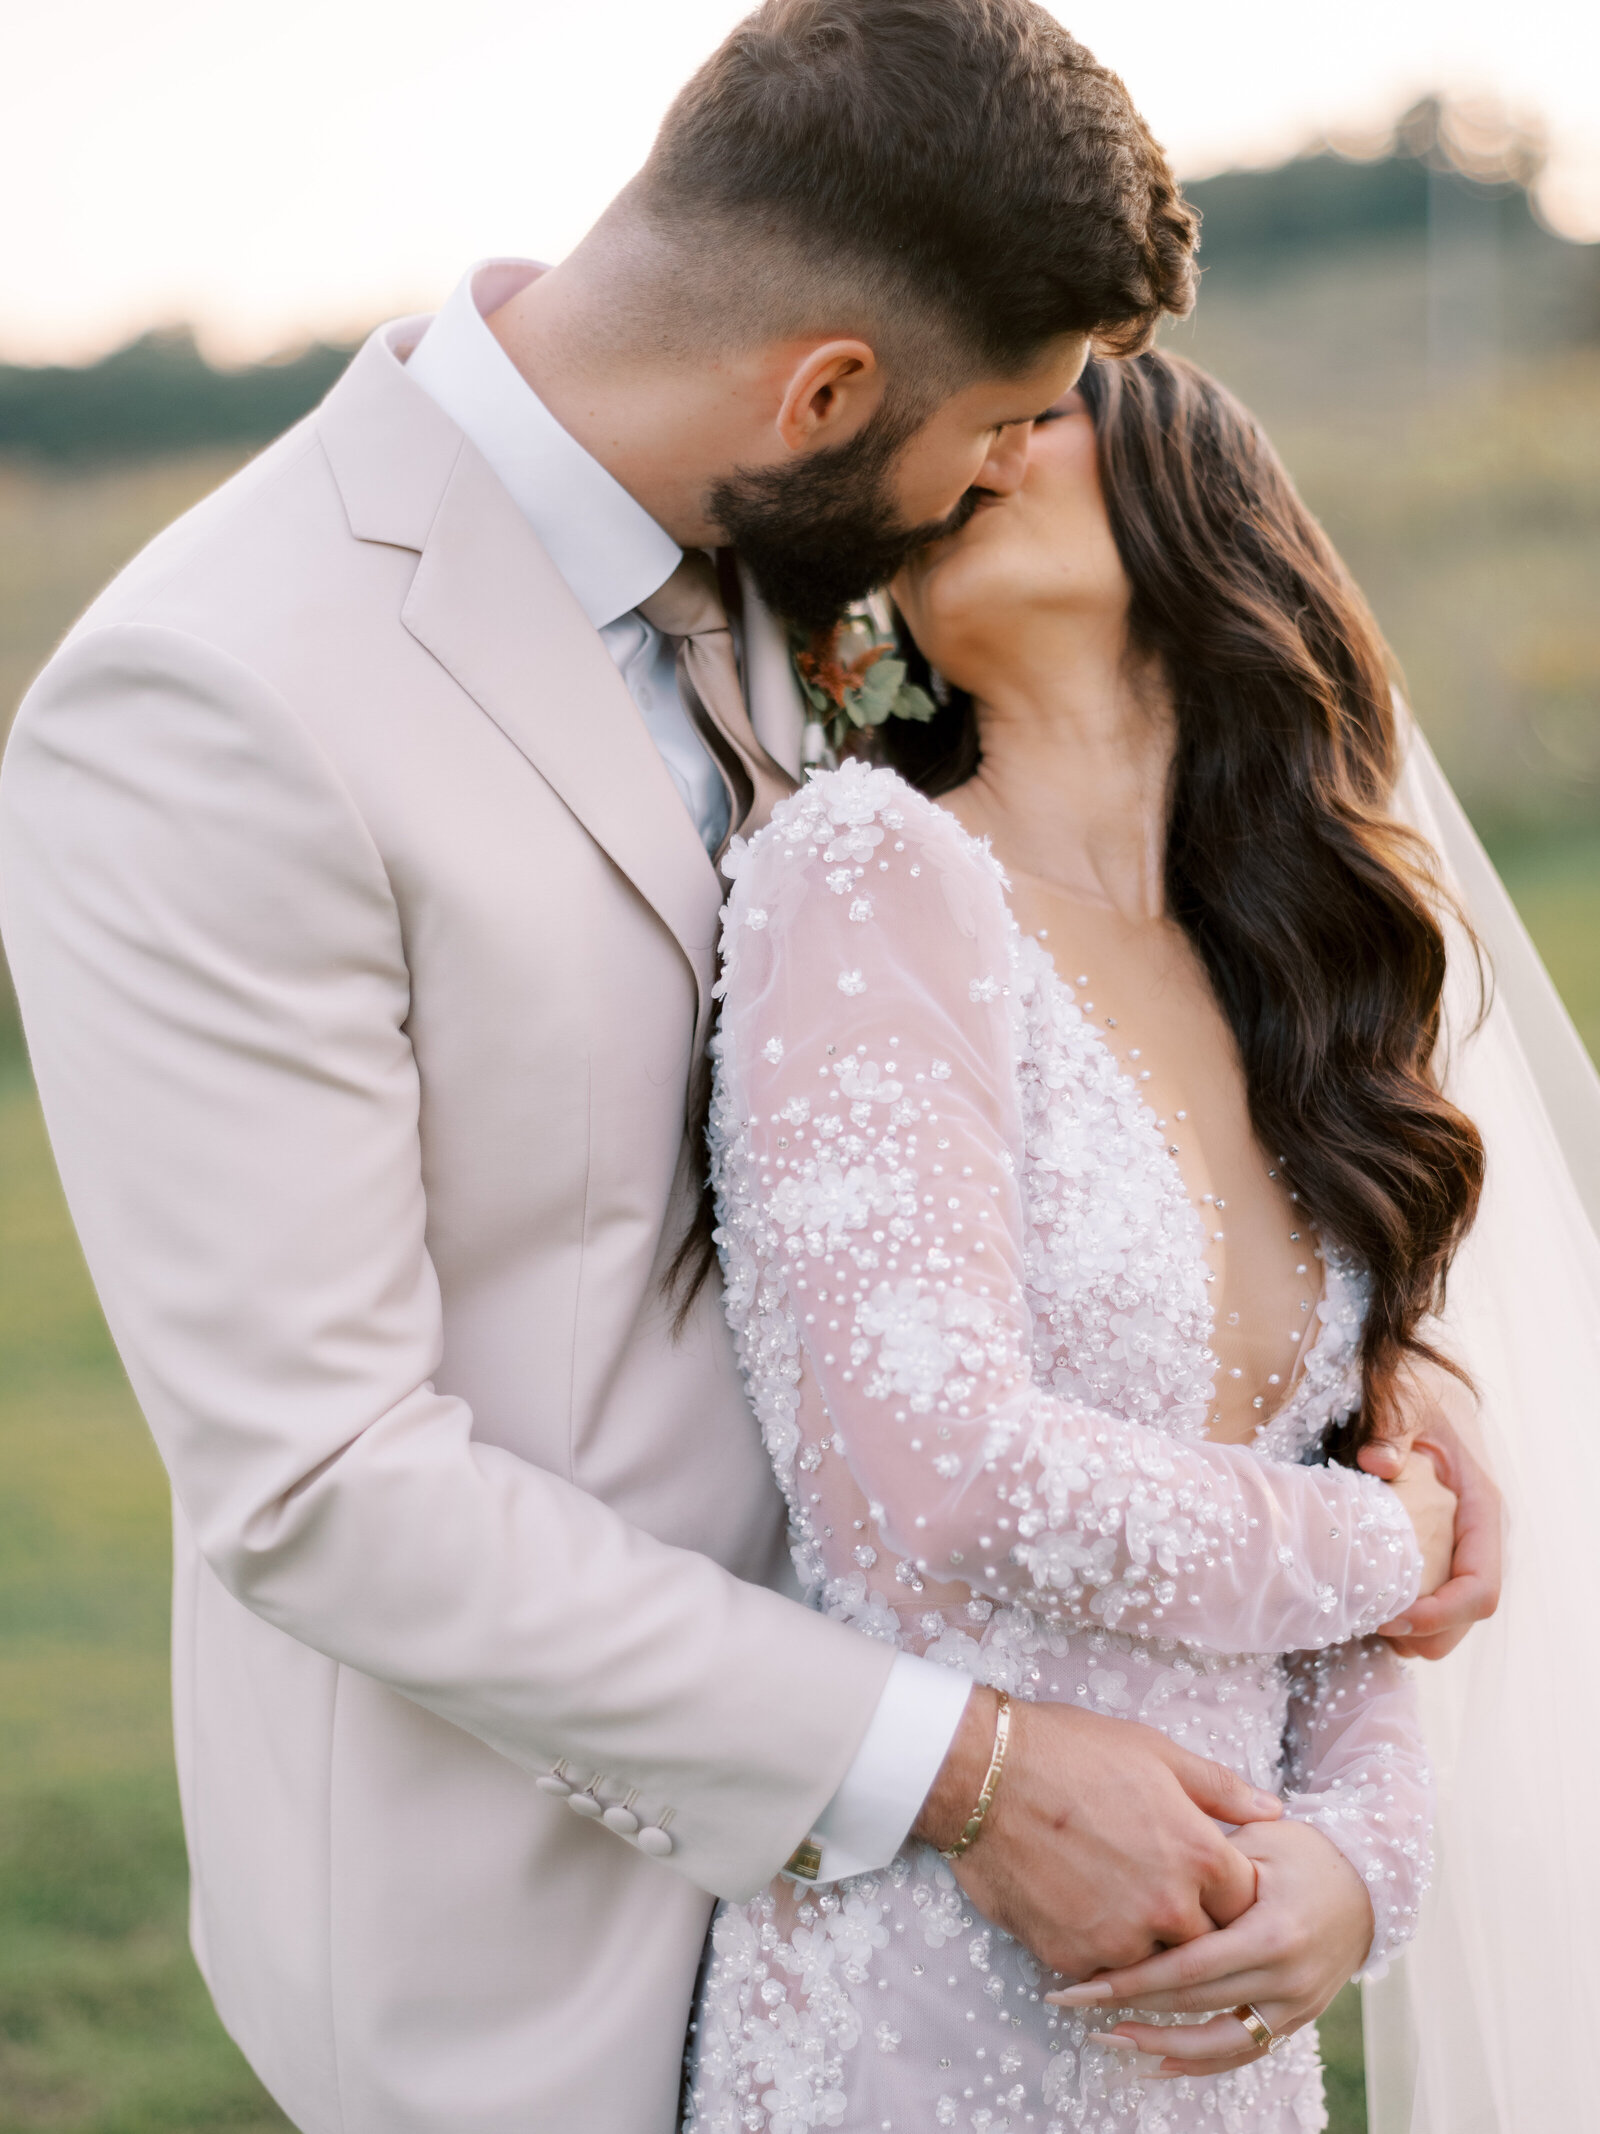 Lindsay Lazare Photography New York Wedding Engagement Photographer Hudson Valley Destination Travel Intentional Timeless Connection Drive Luxury Heirloom Photographs Photos  LLPF1756